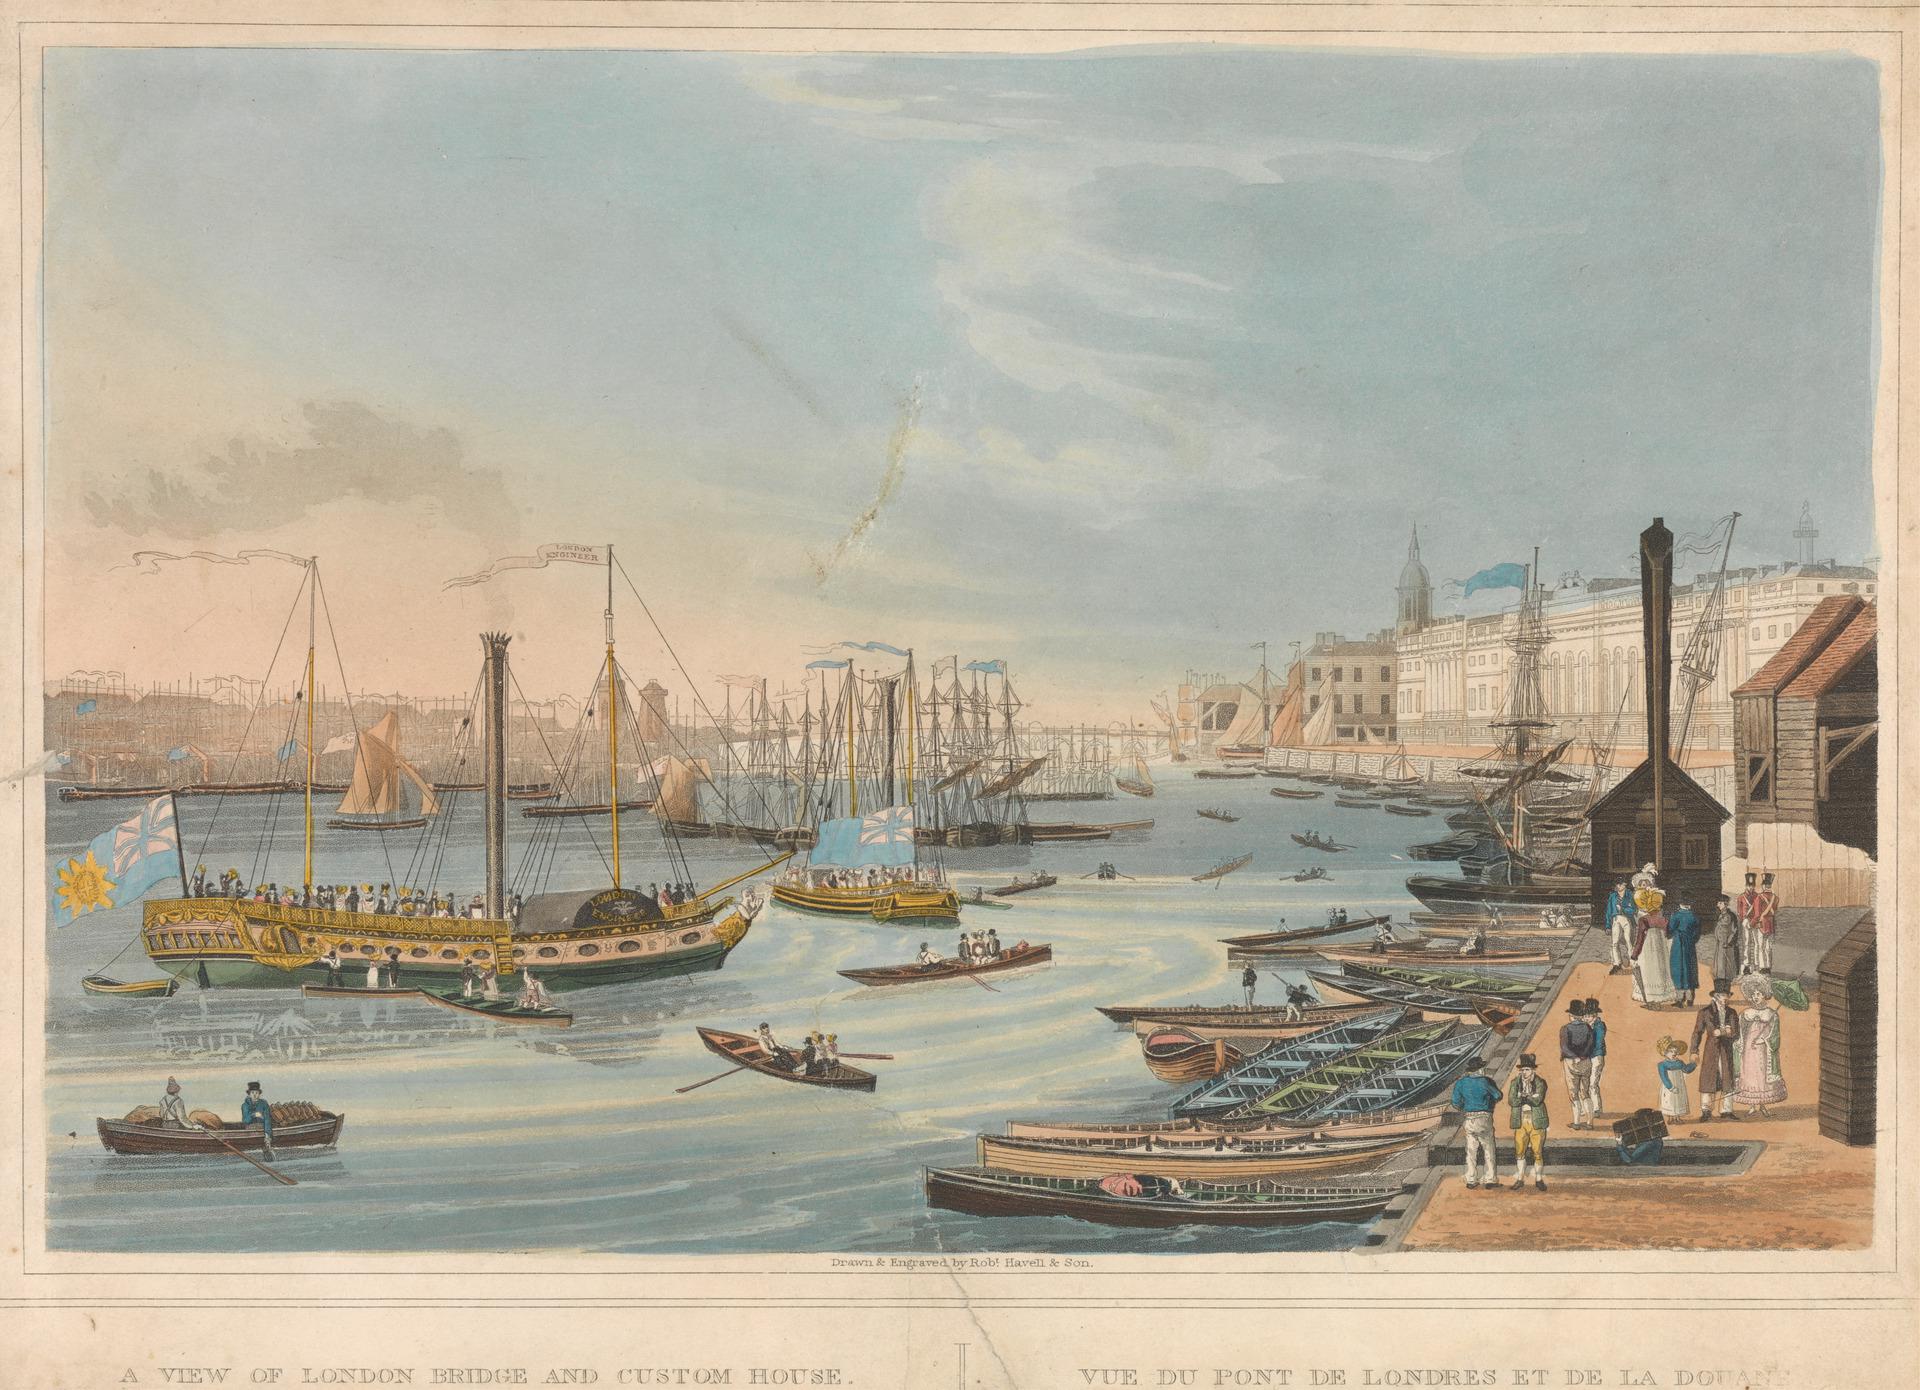 Havell, A View of London Bridge and Custom House_-_B1977.14.18472_-_Yale_Center_for_British_Art